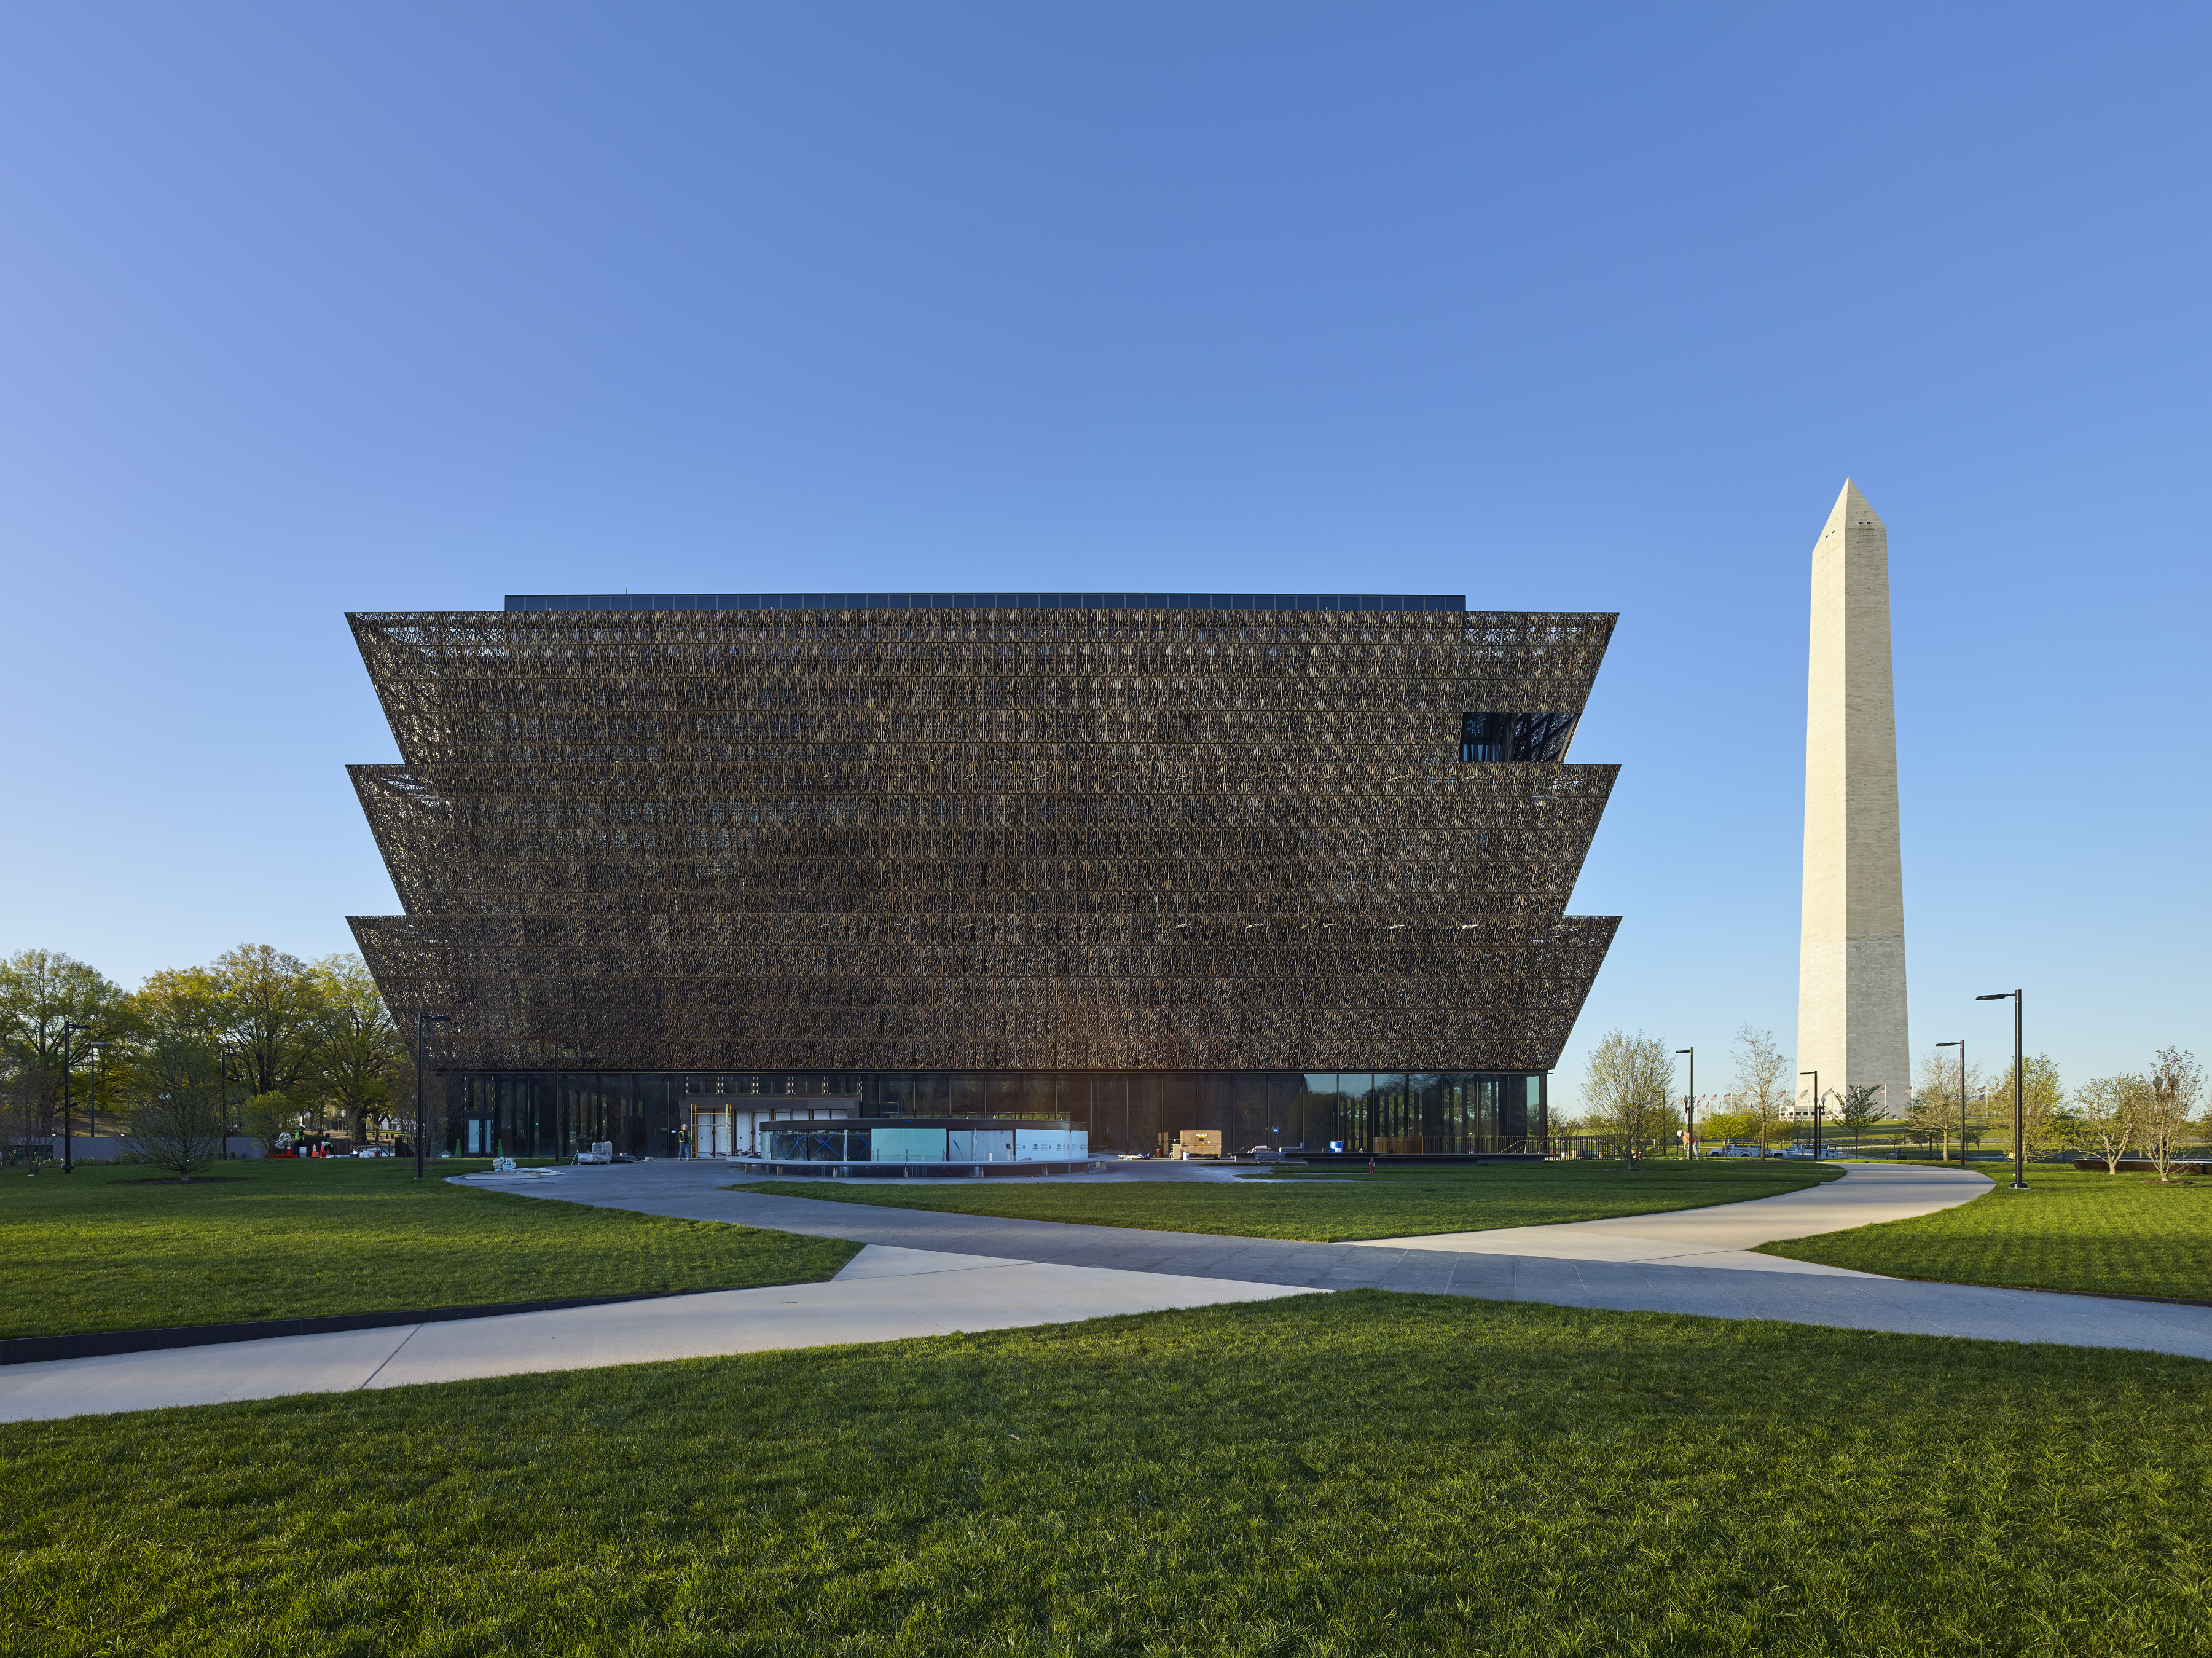 The new National Museum of African American History and Culture in Washington, D.C.